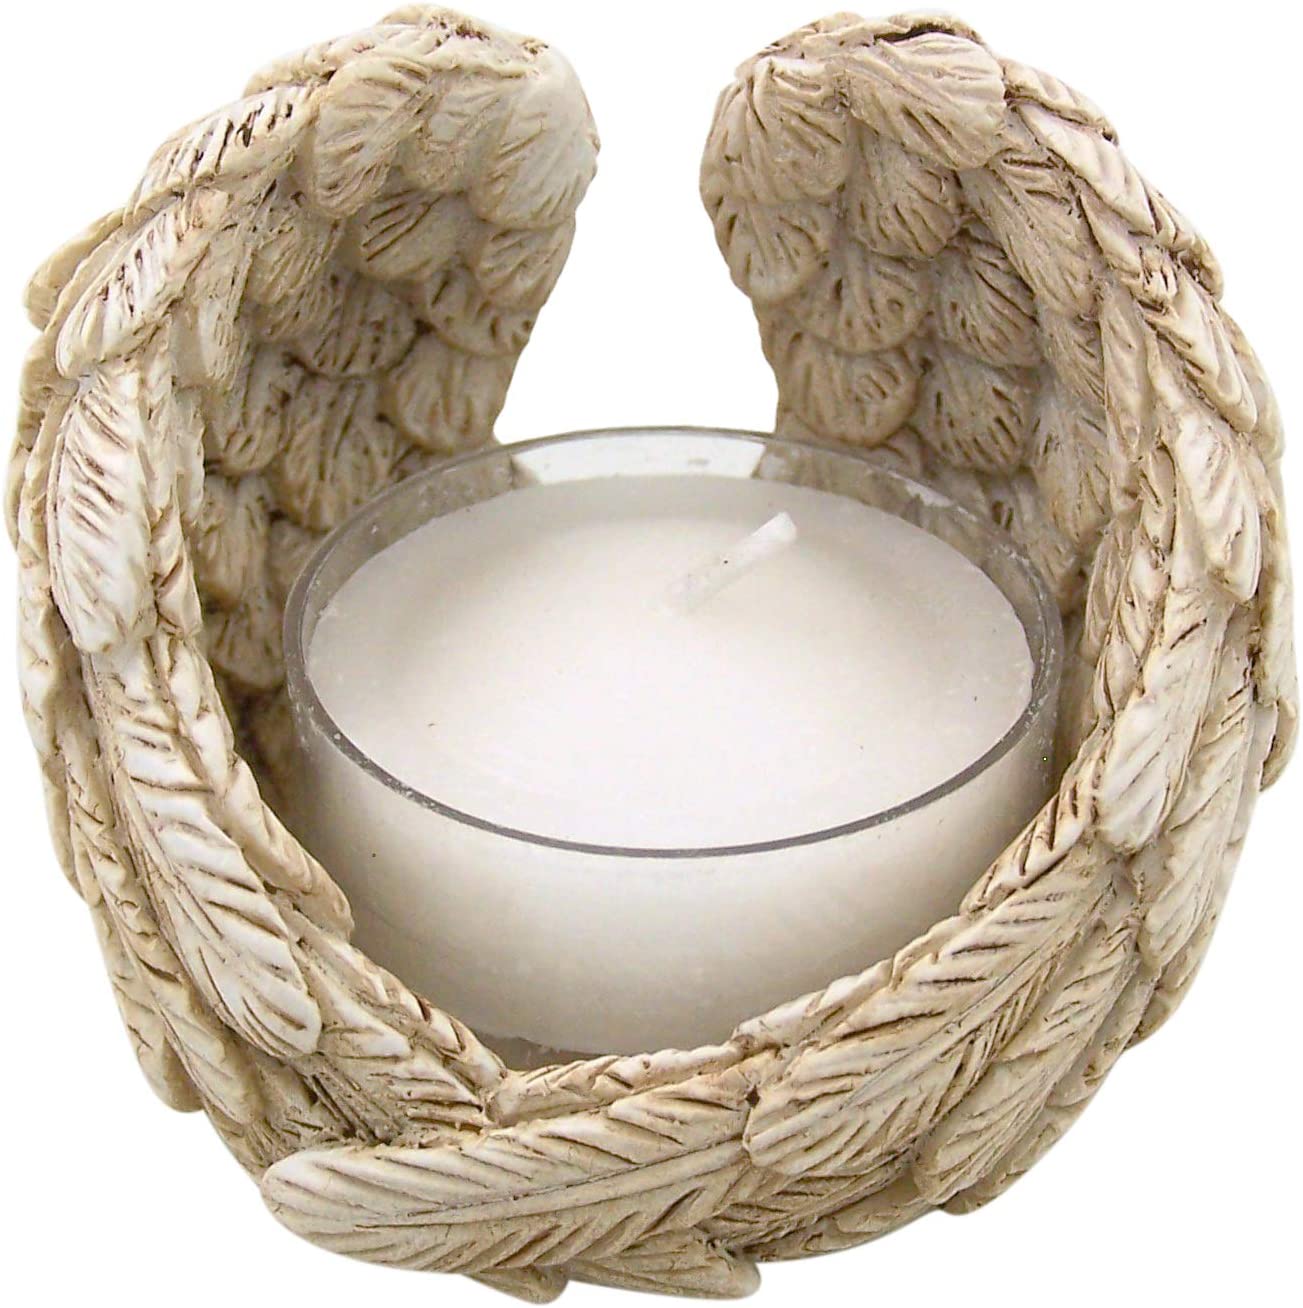 Needzo Guardian Angel Wings Design Tea Light Candle Holder, 2 1/2 Inch, Pack of 2